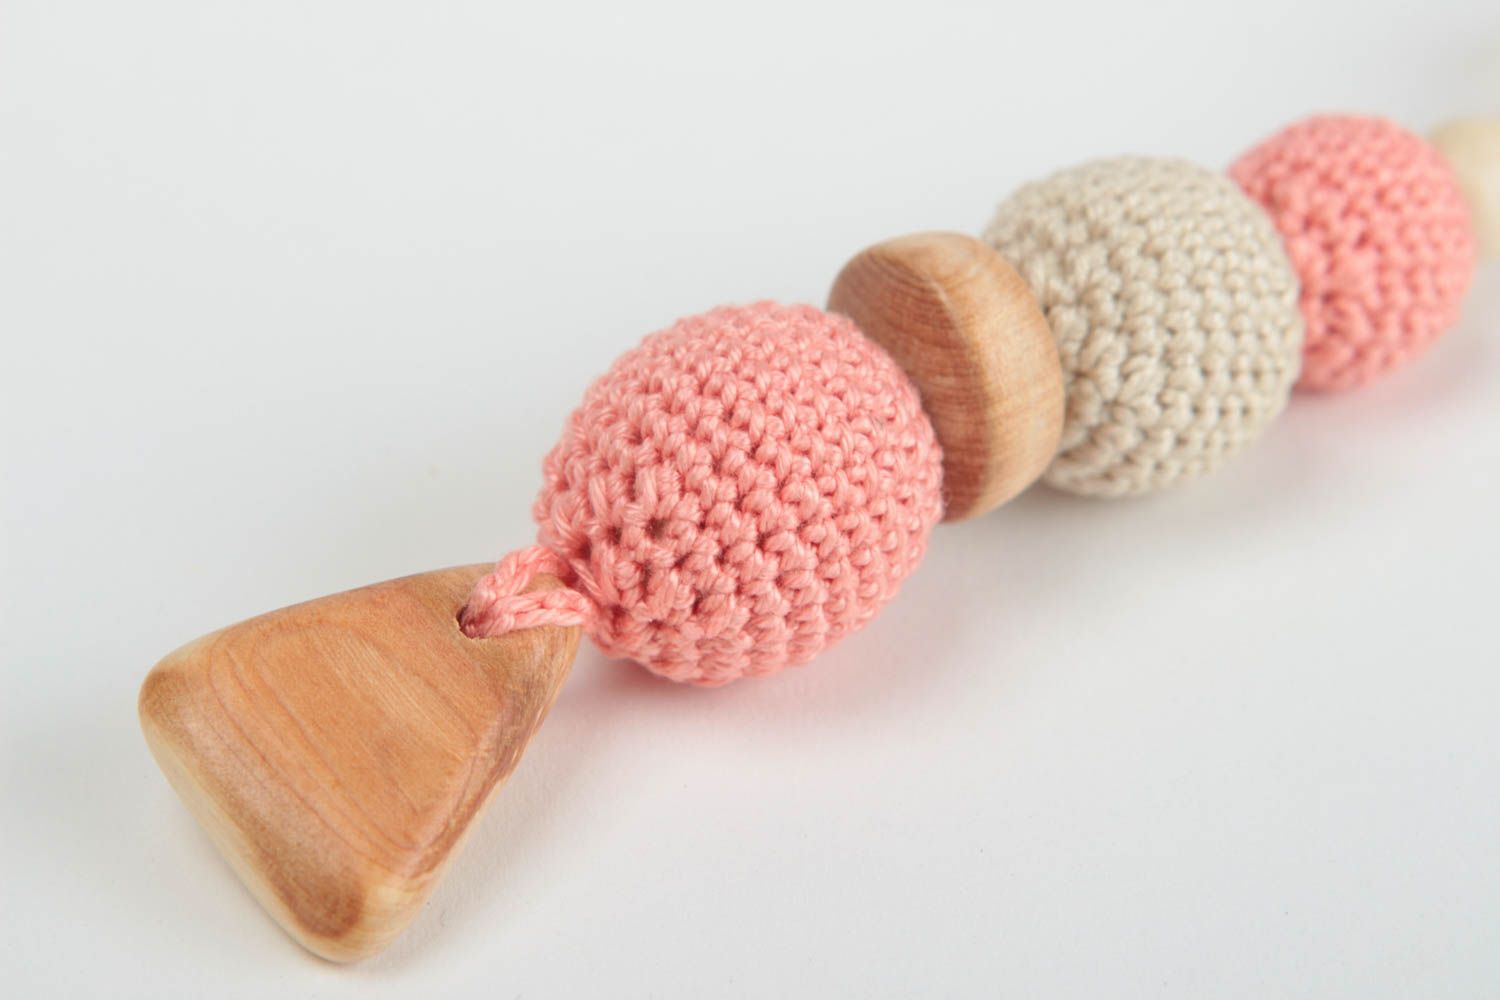 Handmade wooden baby teether toy baby accessories ideas unusual gift ideas photo 3